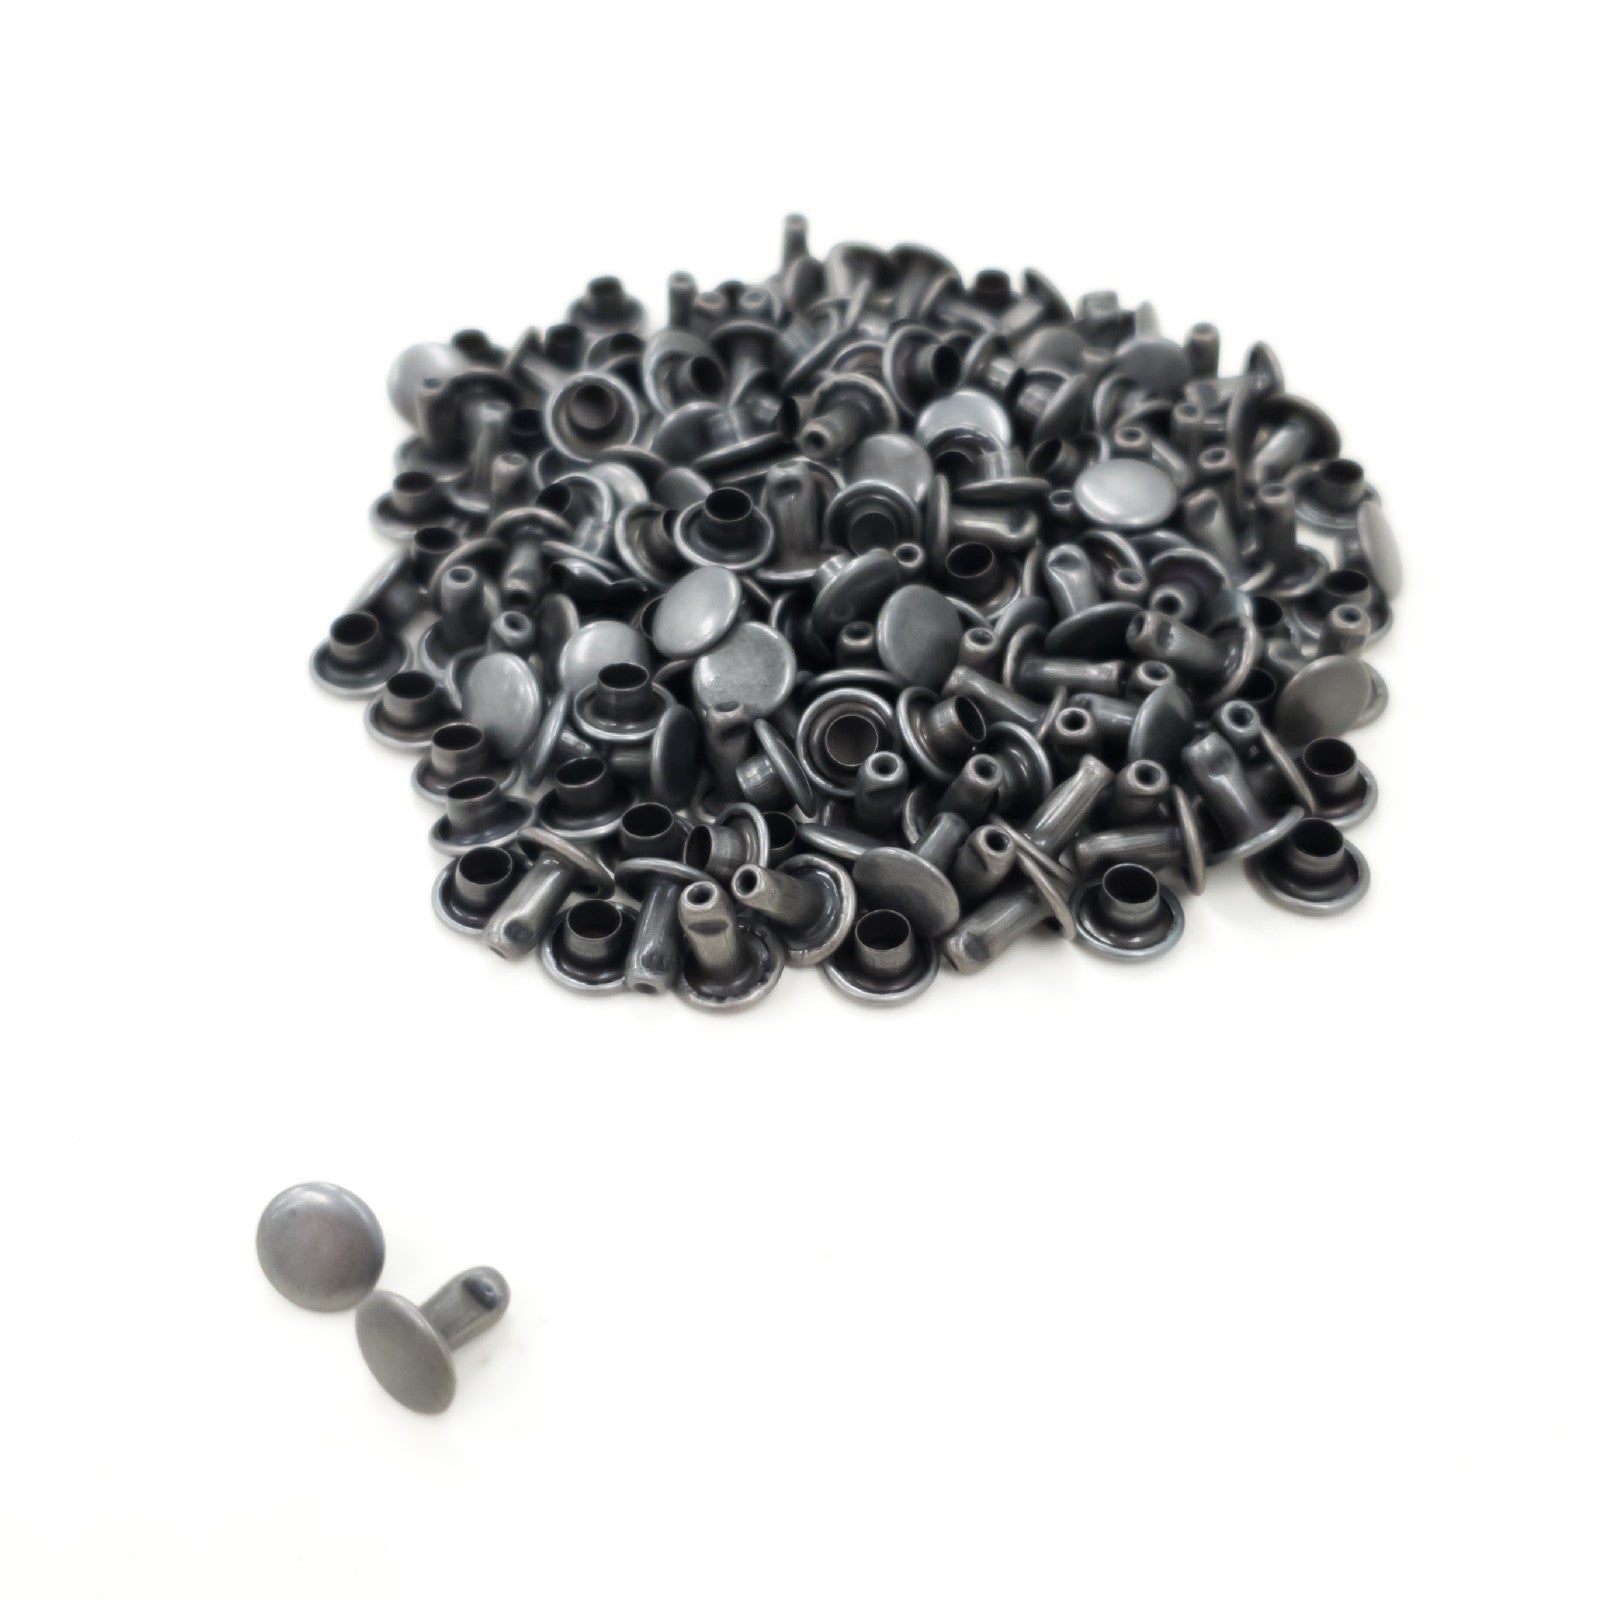 Double cap rivets 9 mm cap 8 mm pin height Rapid Rivets studs leather AFZ